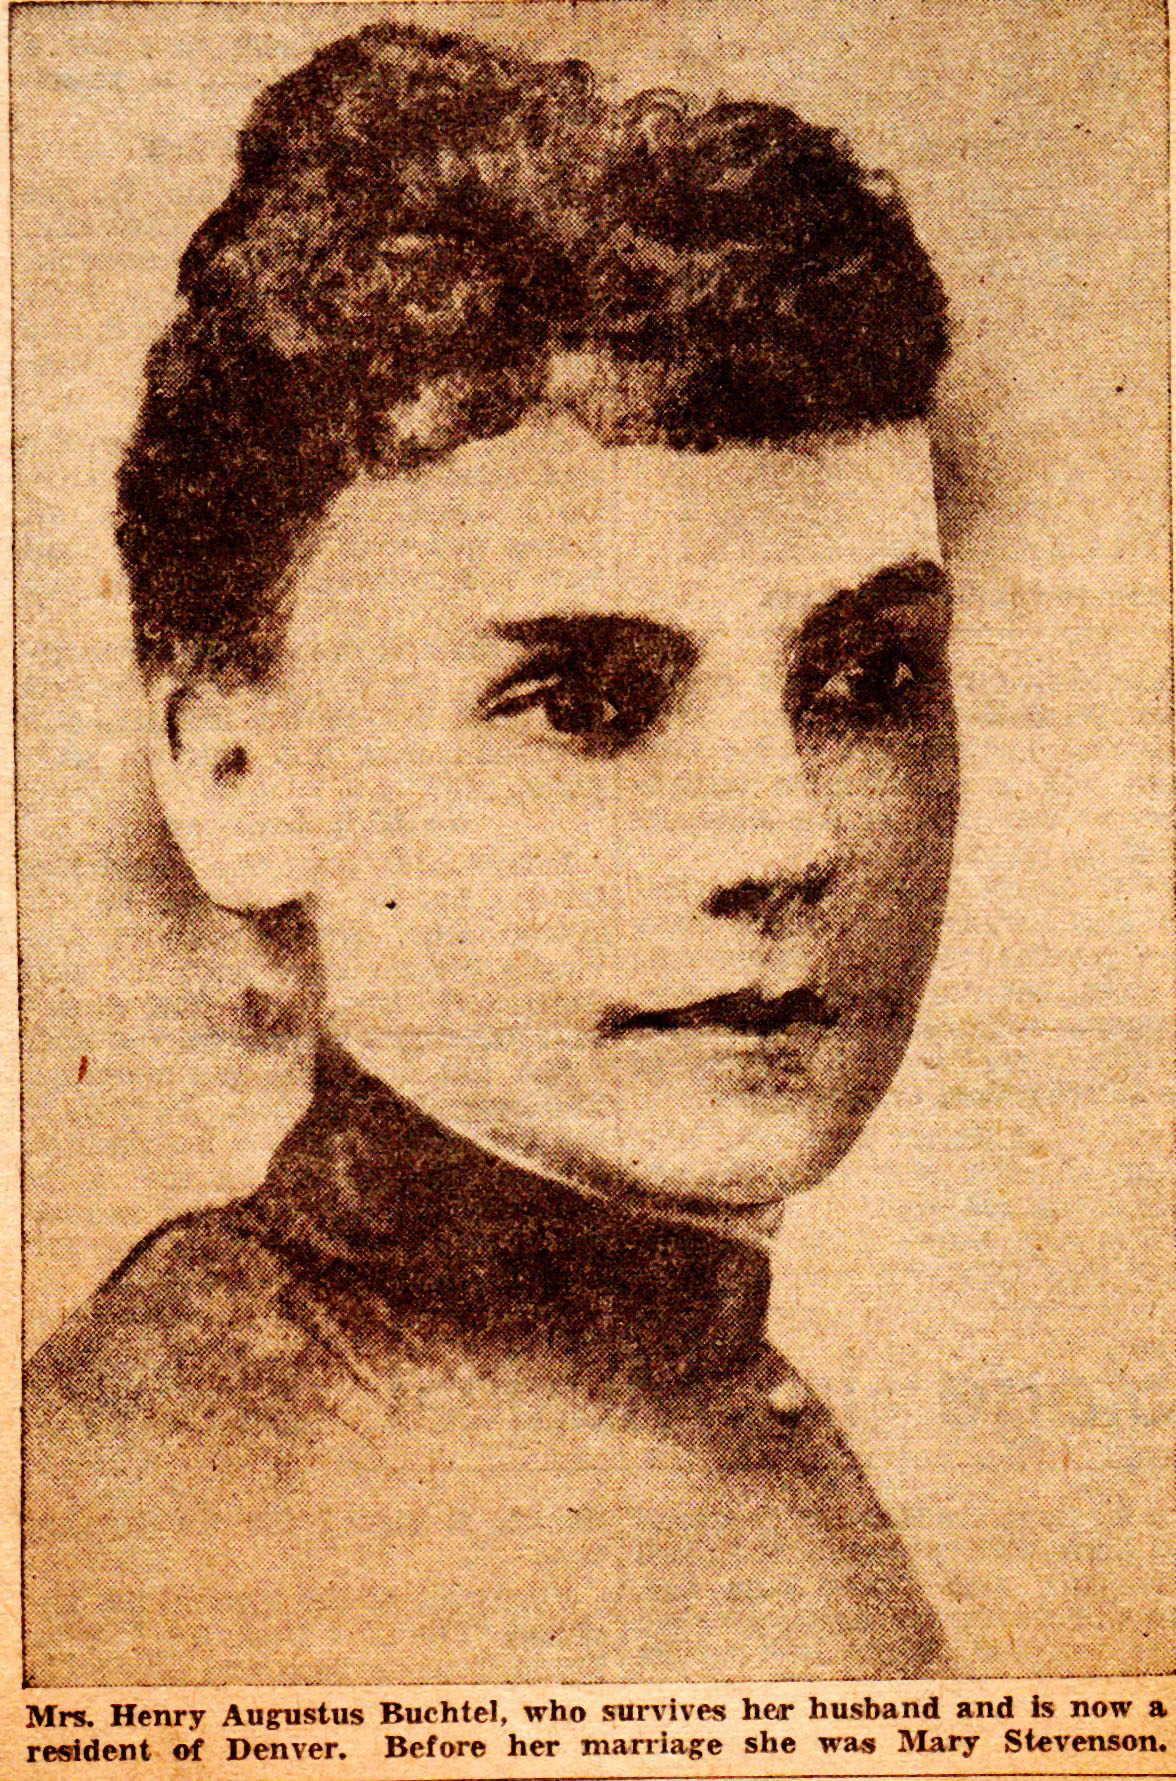 Mary Stevenson Buchtel, wife of Henry Augustus Buchtel, picture published in the Akron Times Press 15 Aug 1937